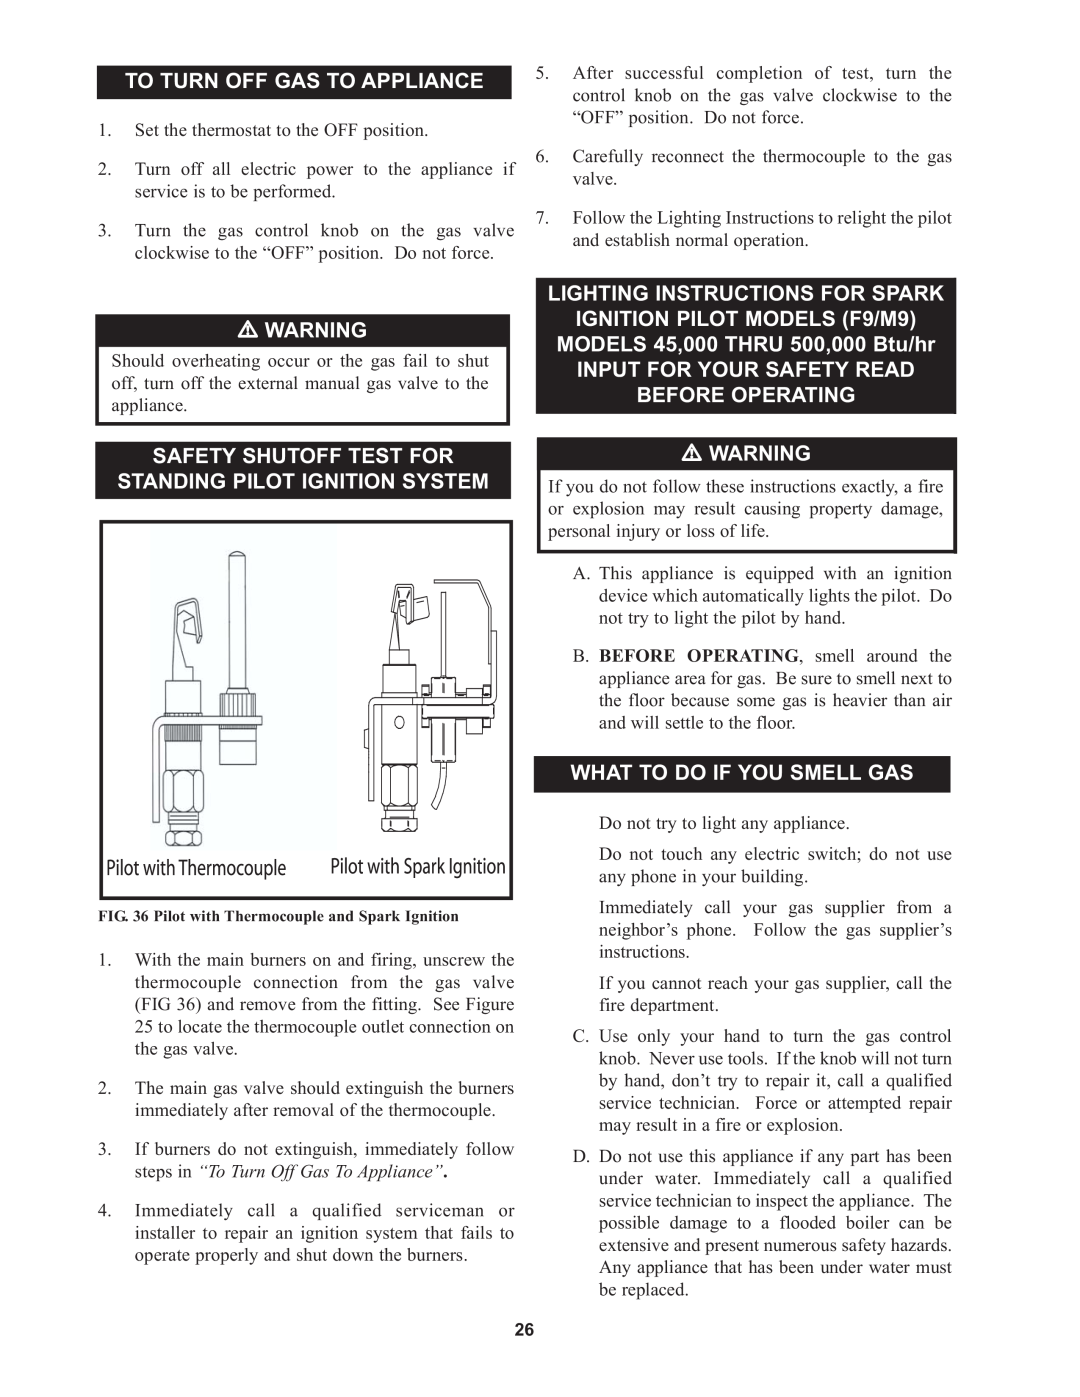 Lochinvar 45, CP-5M-4/08, RSB-i&s-05 To Turn Off Gas To Appliance, Safety Shutoff Test For, Standing Pilot Ignition System 